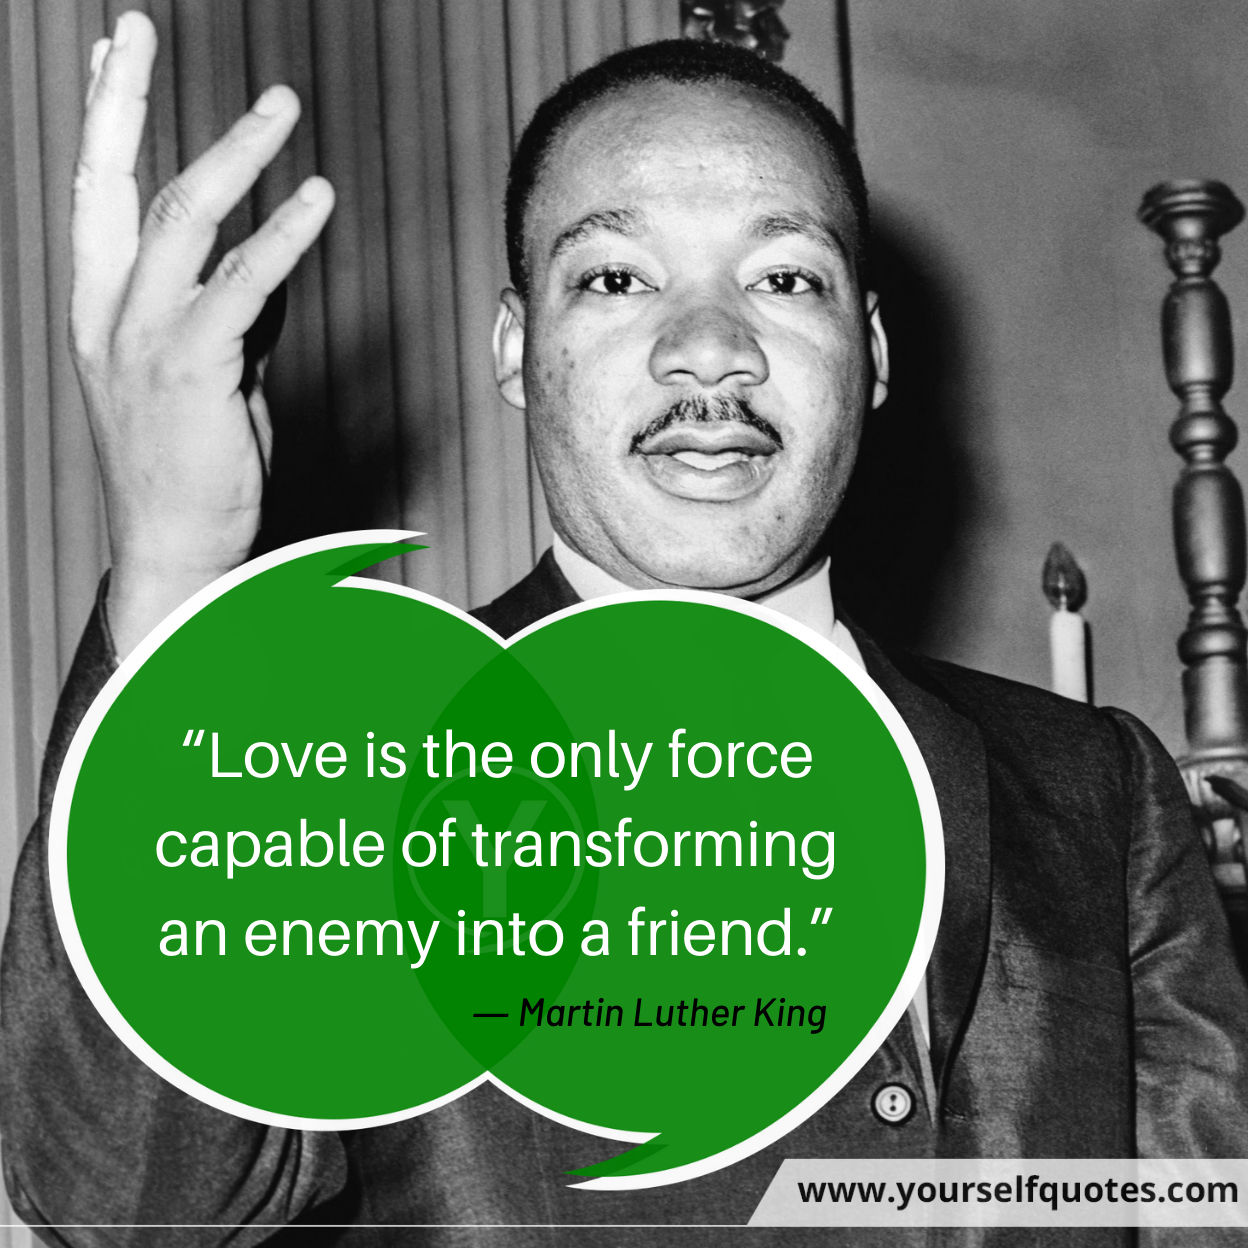 Quotes on Love by Martin Luther King